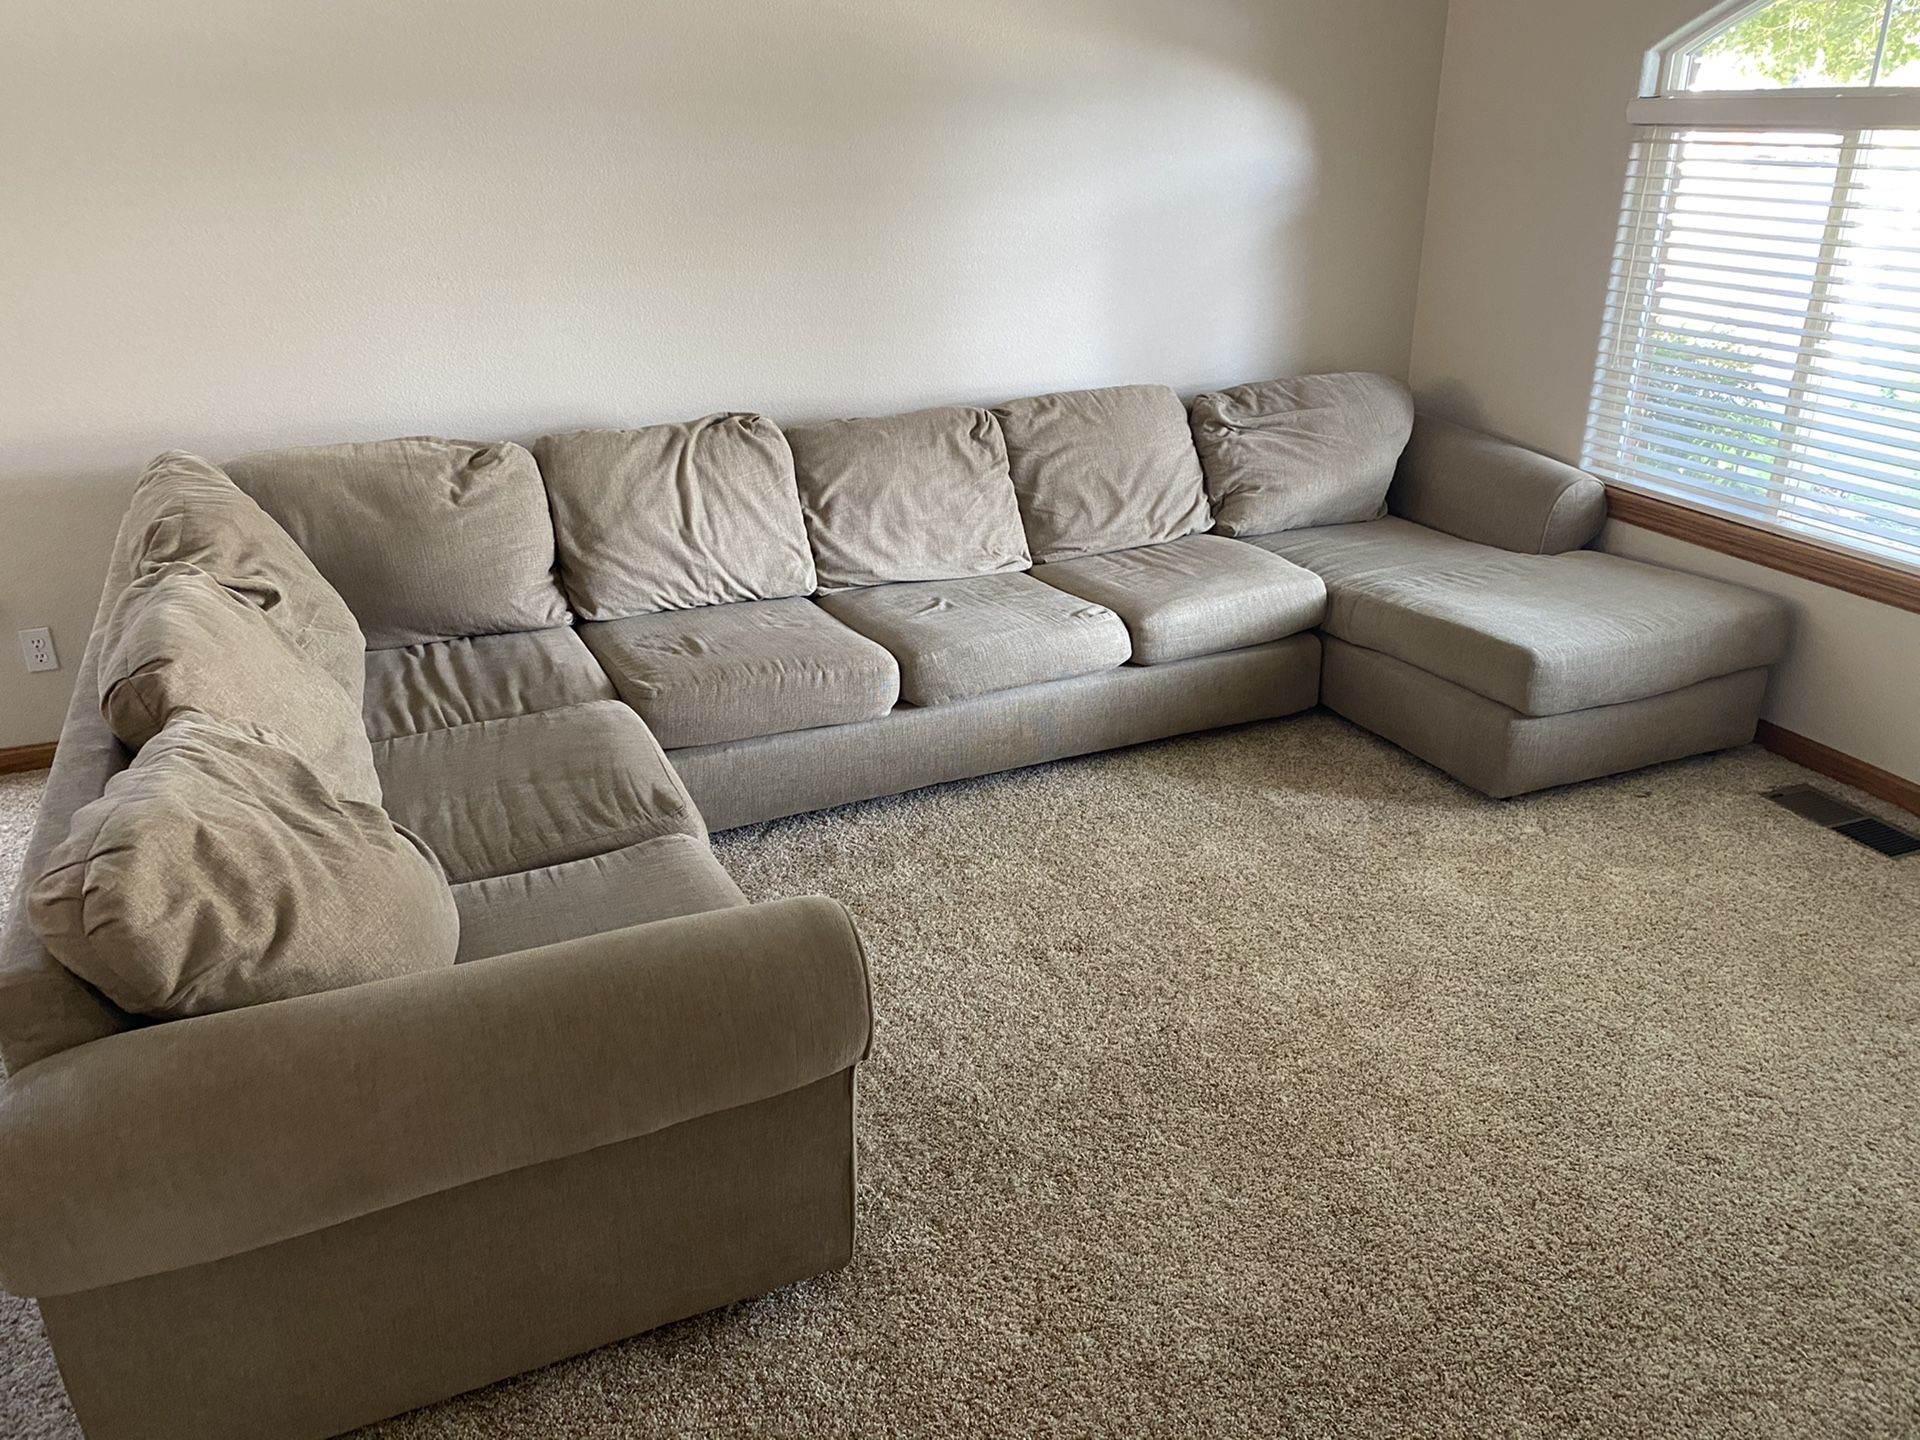 Entire sectional couch